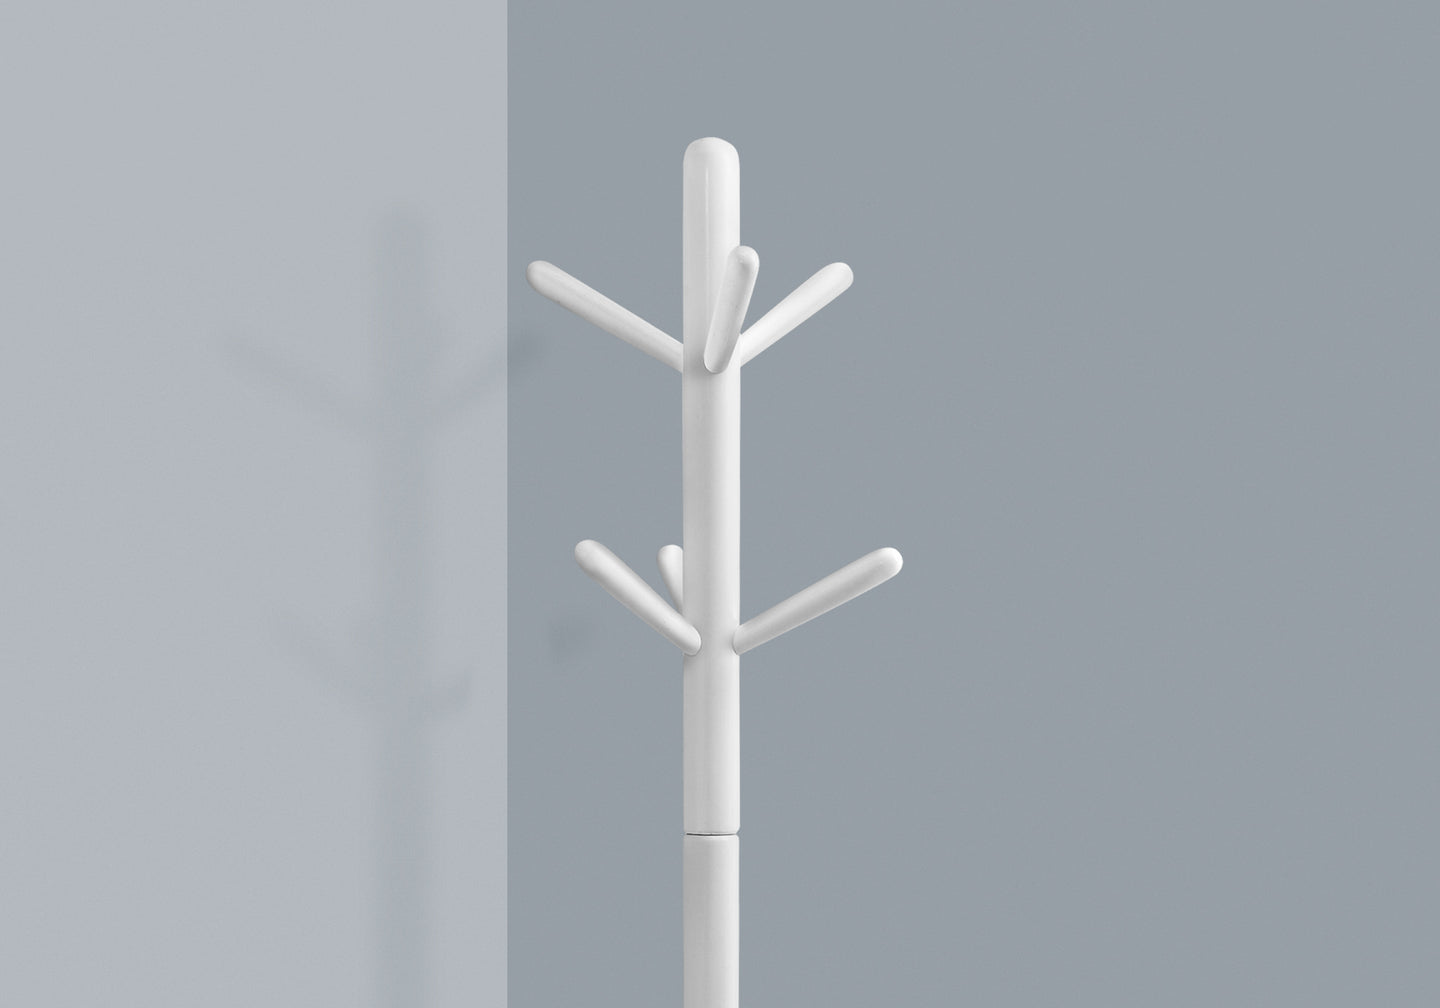 I 2002 Coat Rack - 69"H / White Wood Contemporary Style - Furniture Depot (7881076277496)